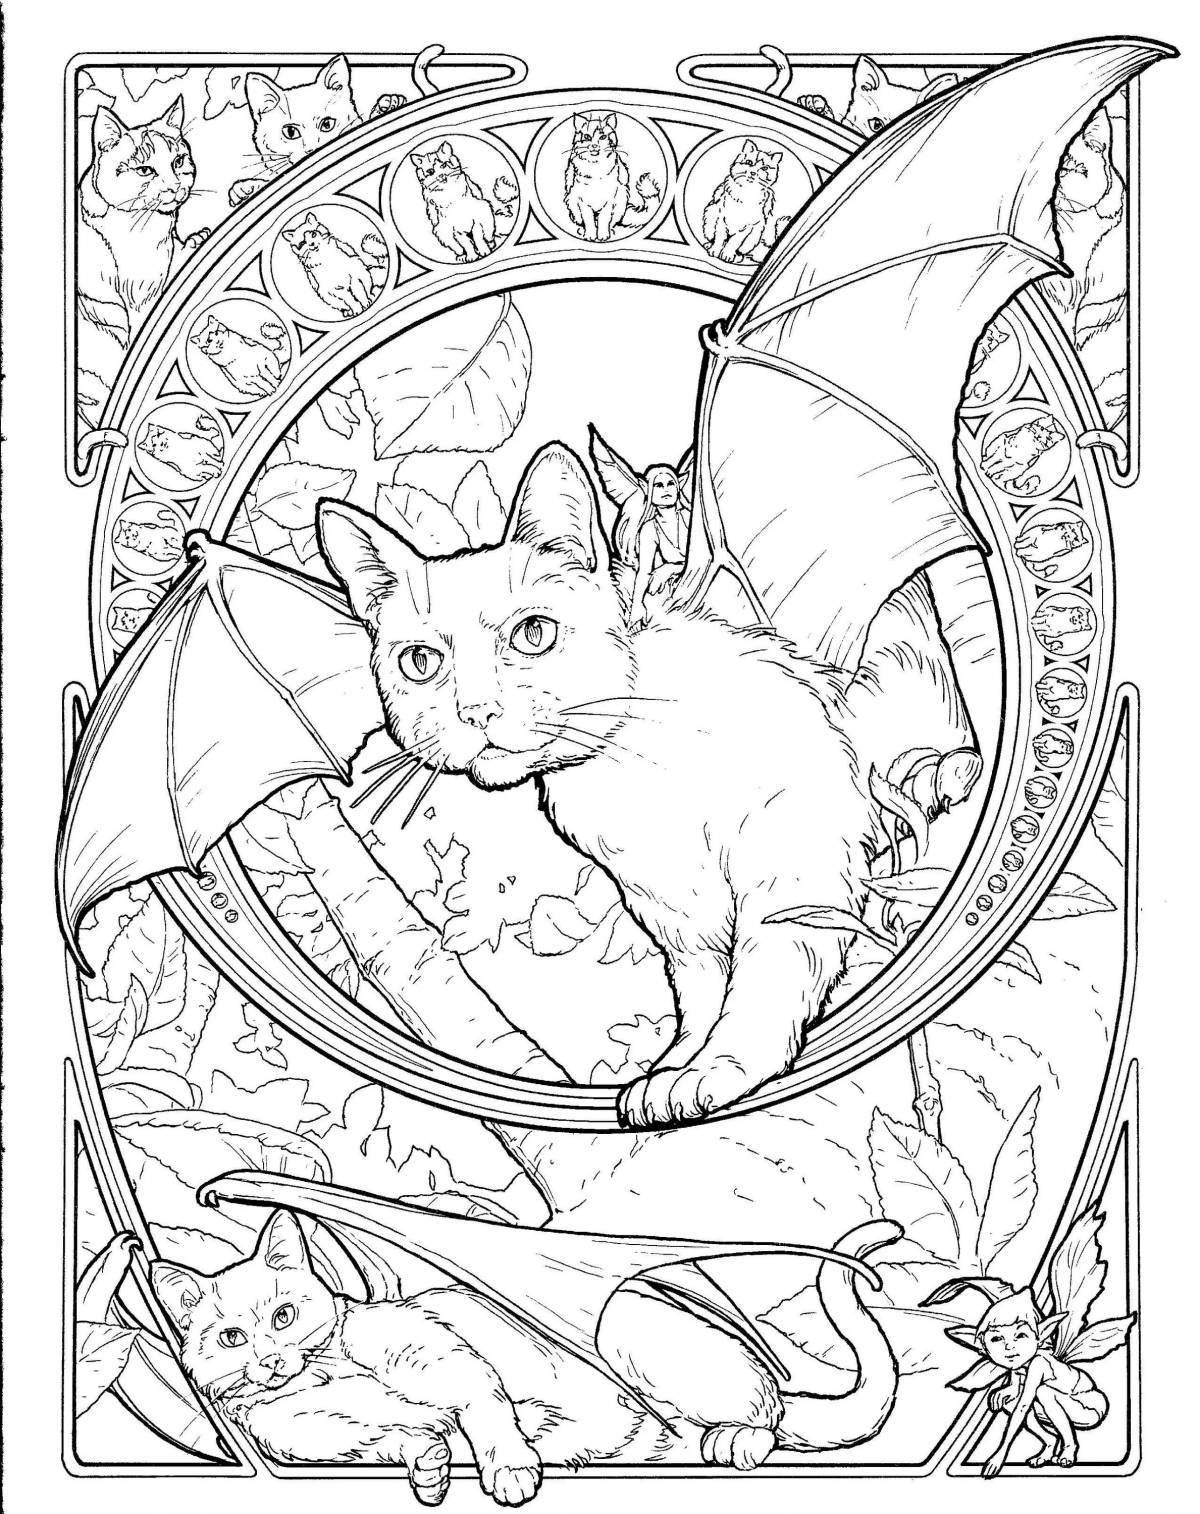 Coloring page nice magic cats